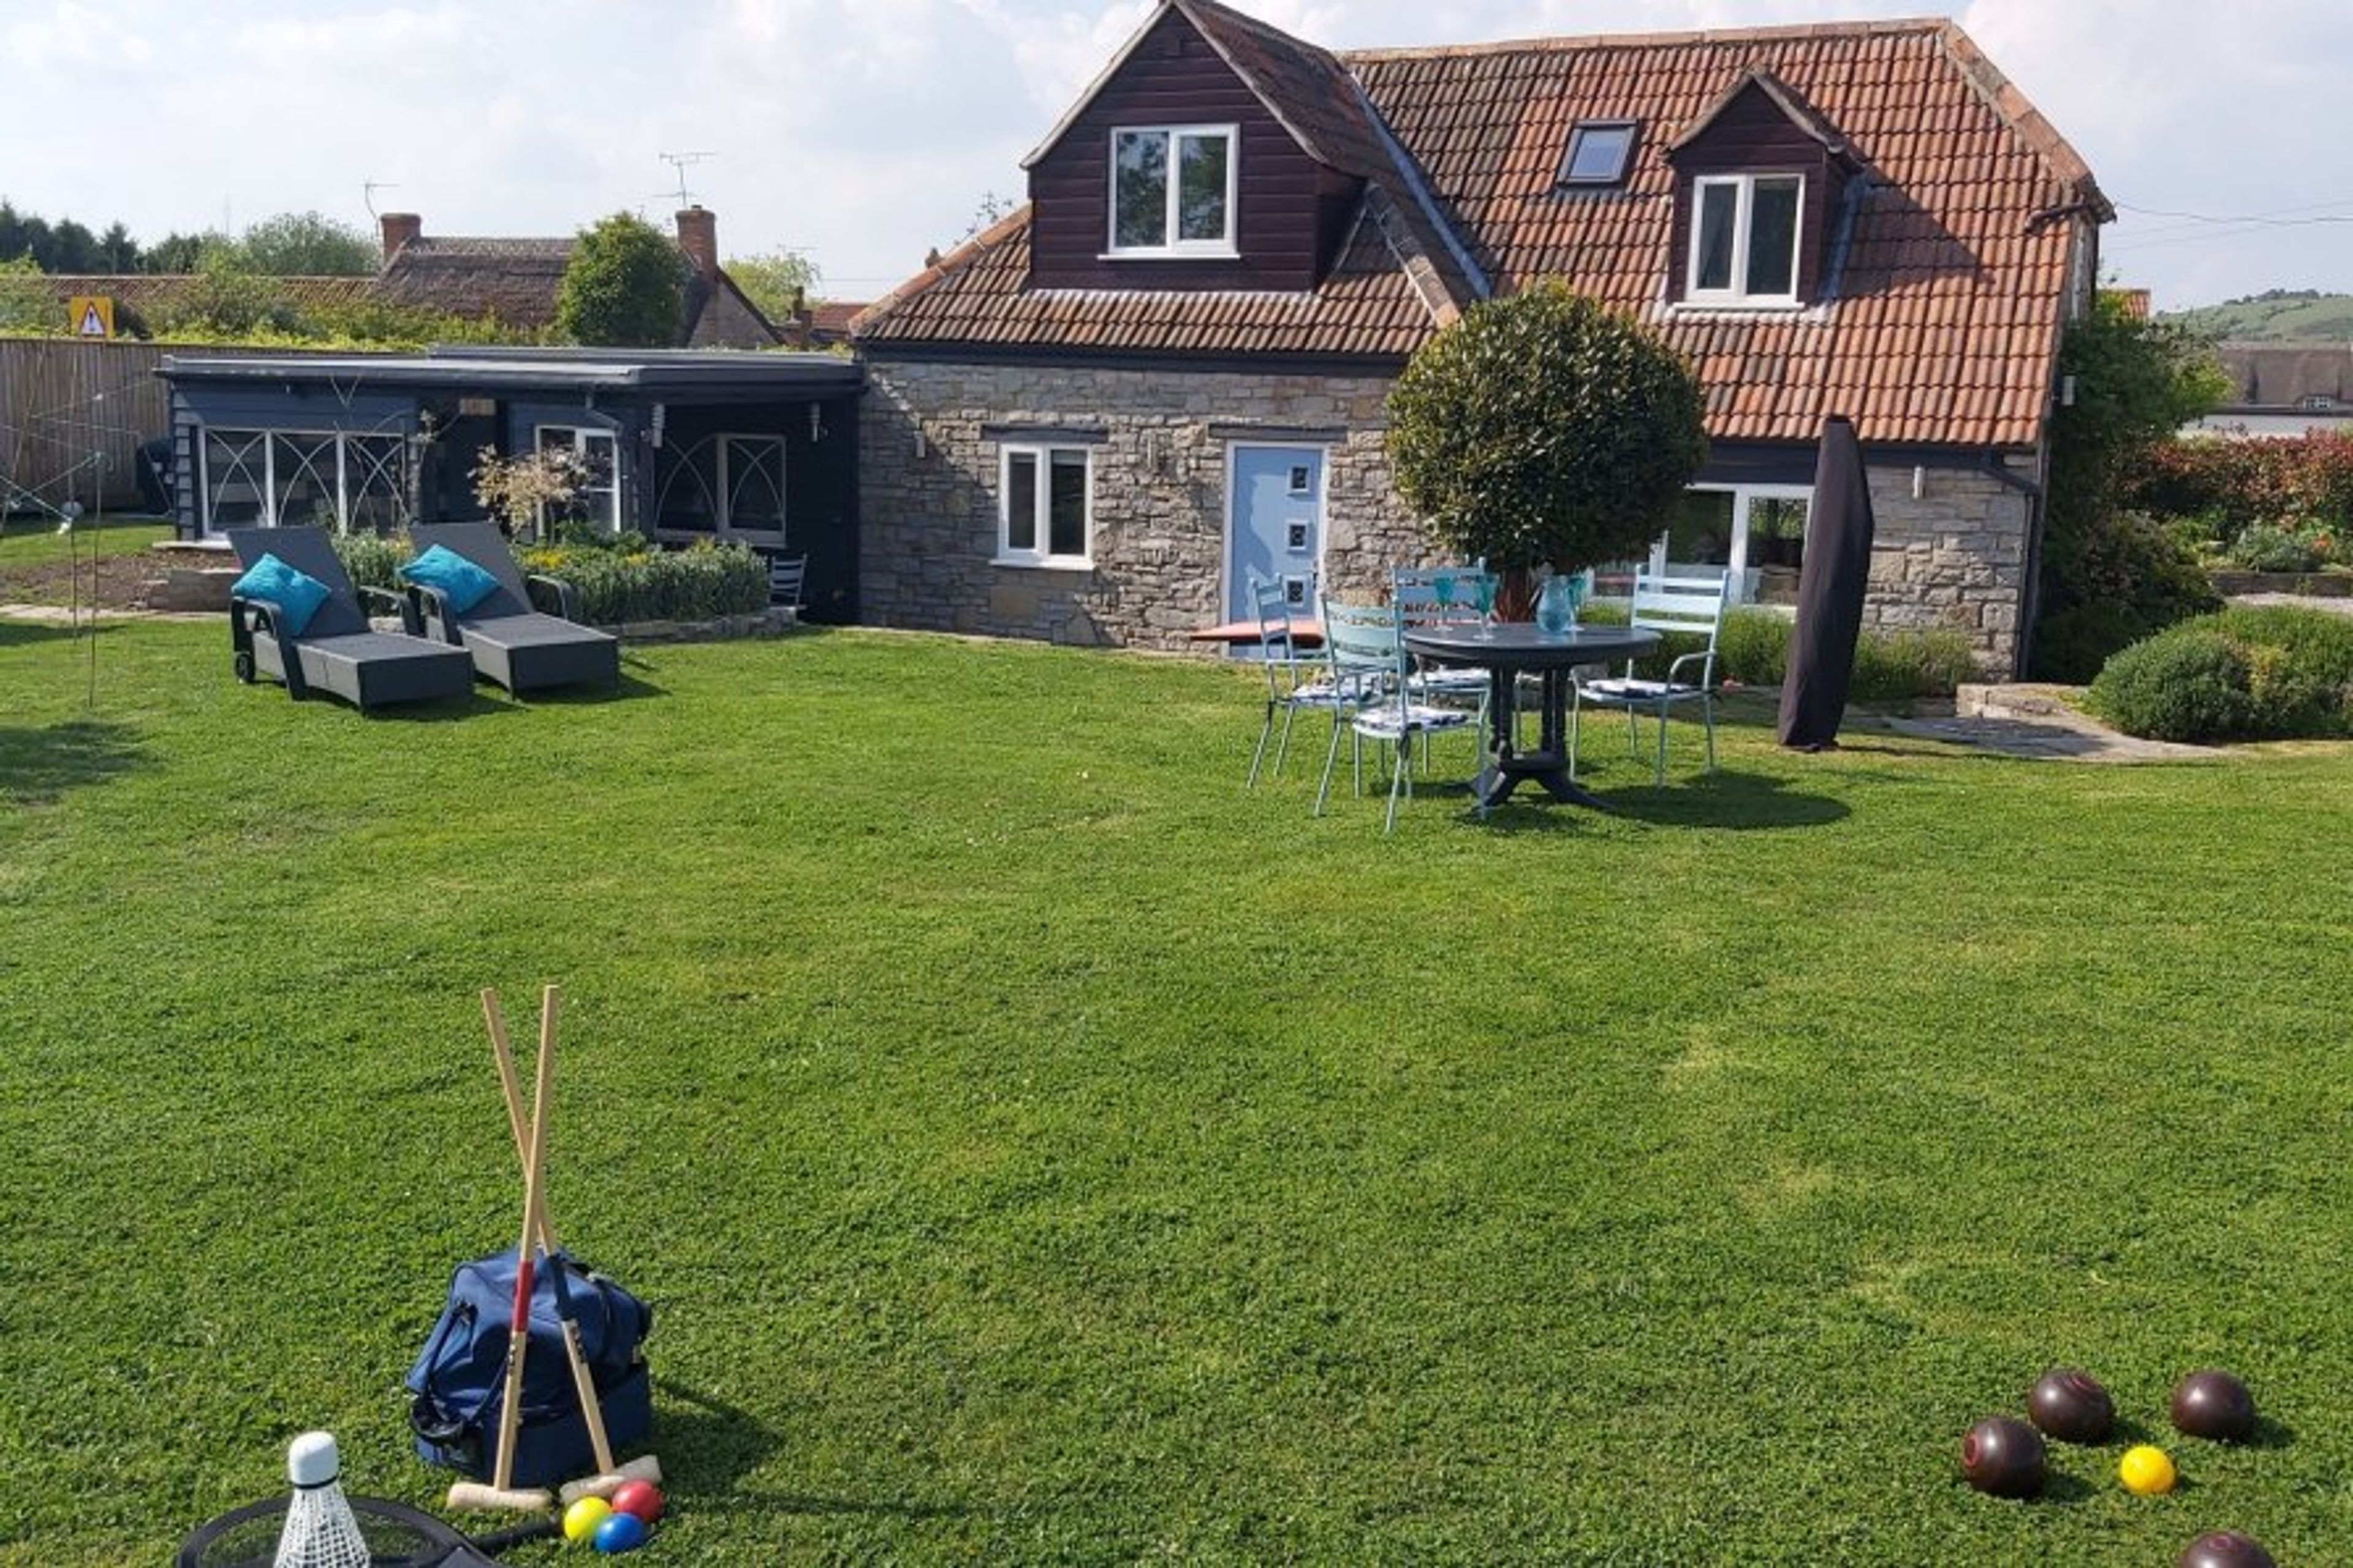 Fabulous detached cottage with spacious garden. Croquet and lawn bowls